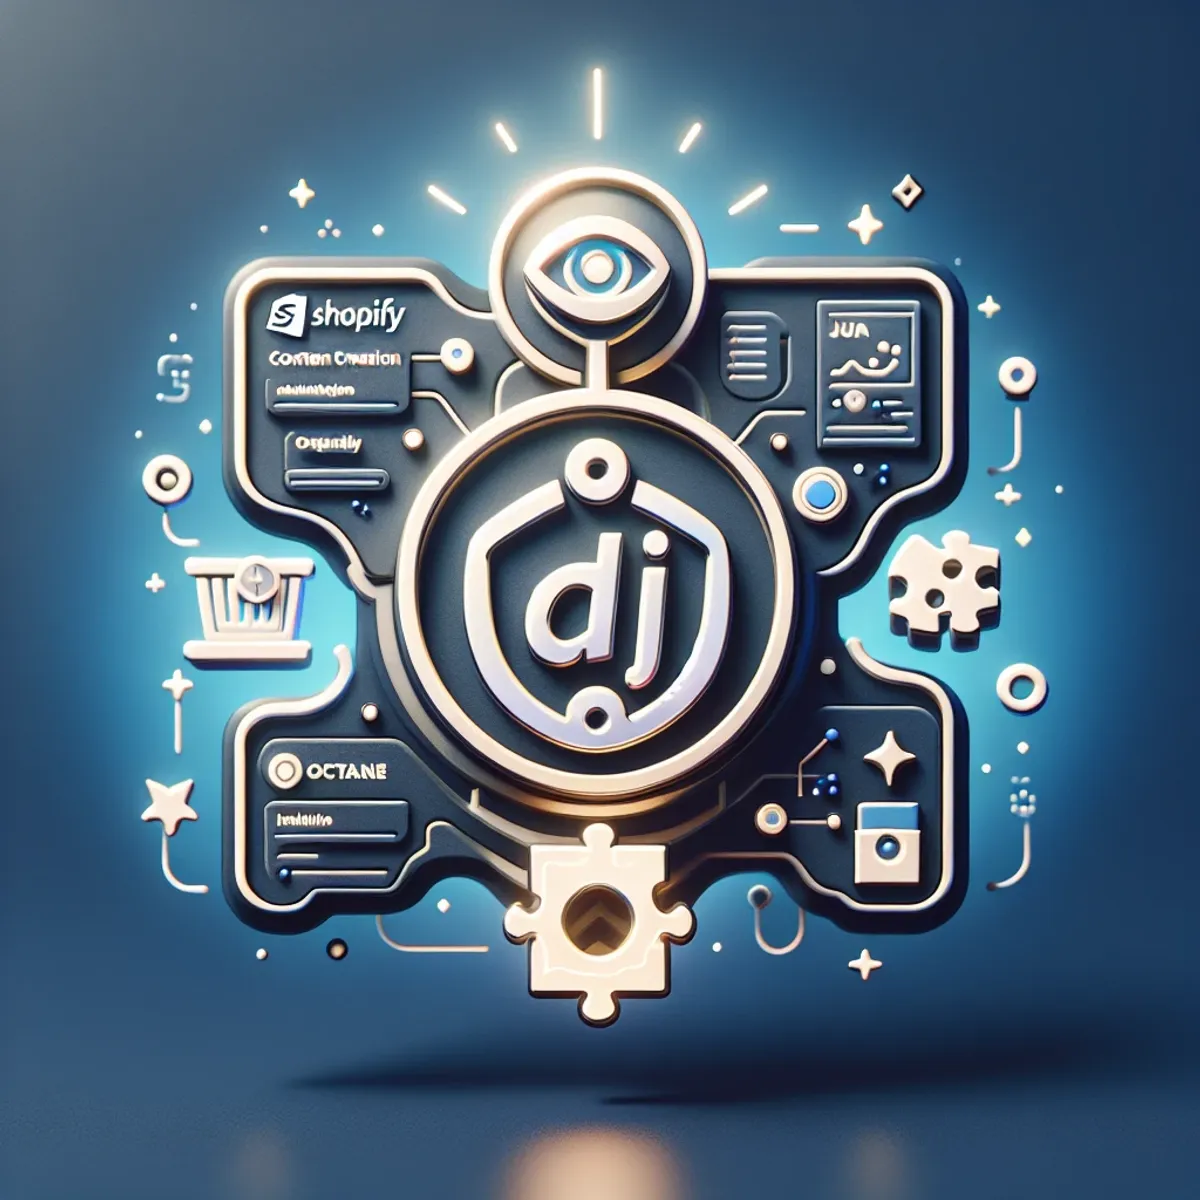 A digital art image featuring two symbols. The first symbol is Junia AI, depicted as a futuristic, highly technological object with a user-friendly design, surrounded by a soft glow. The second symbol is Octane AI, visualized as an innovative tool with interactive and personalized features, represented by puzzle pieces fitting together to form a product shape.